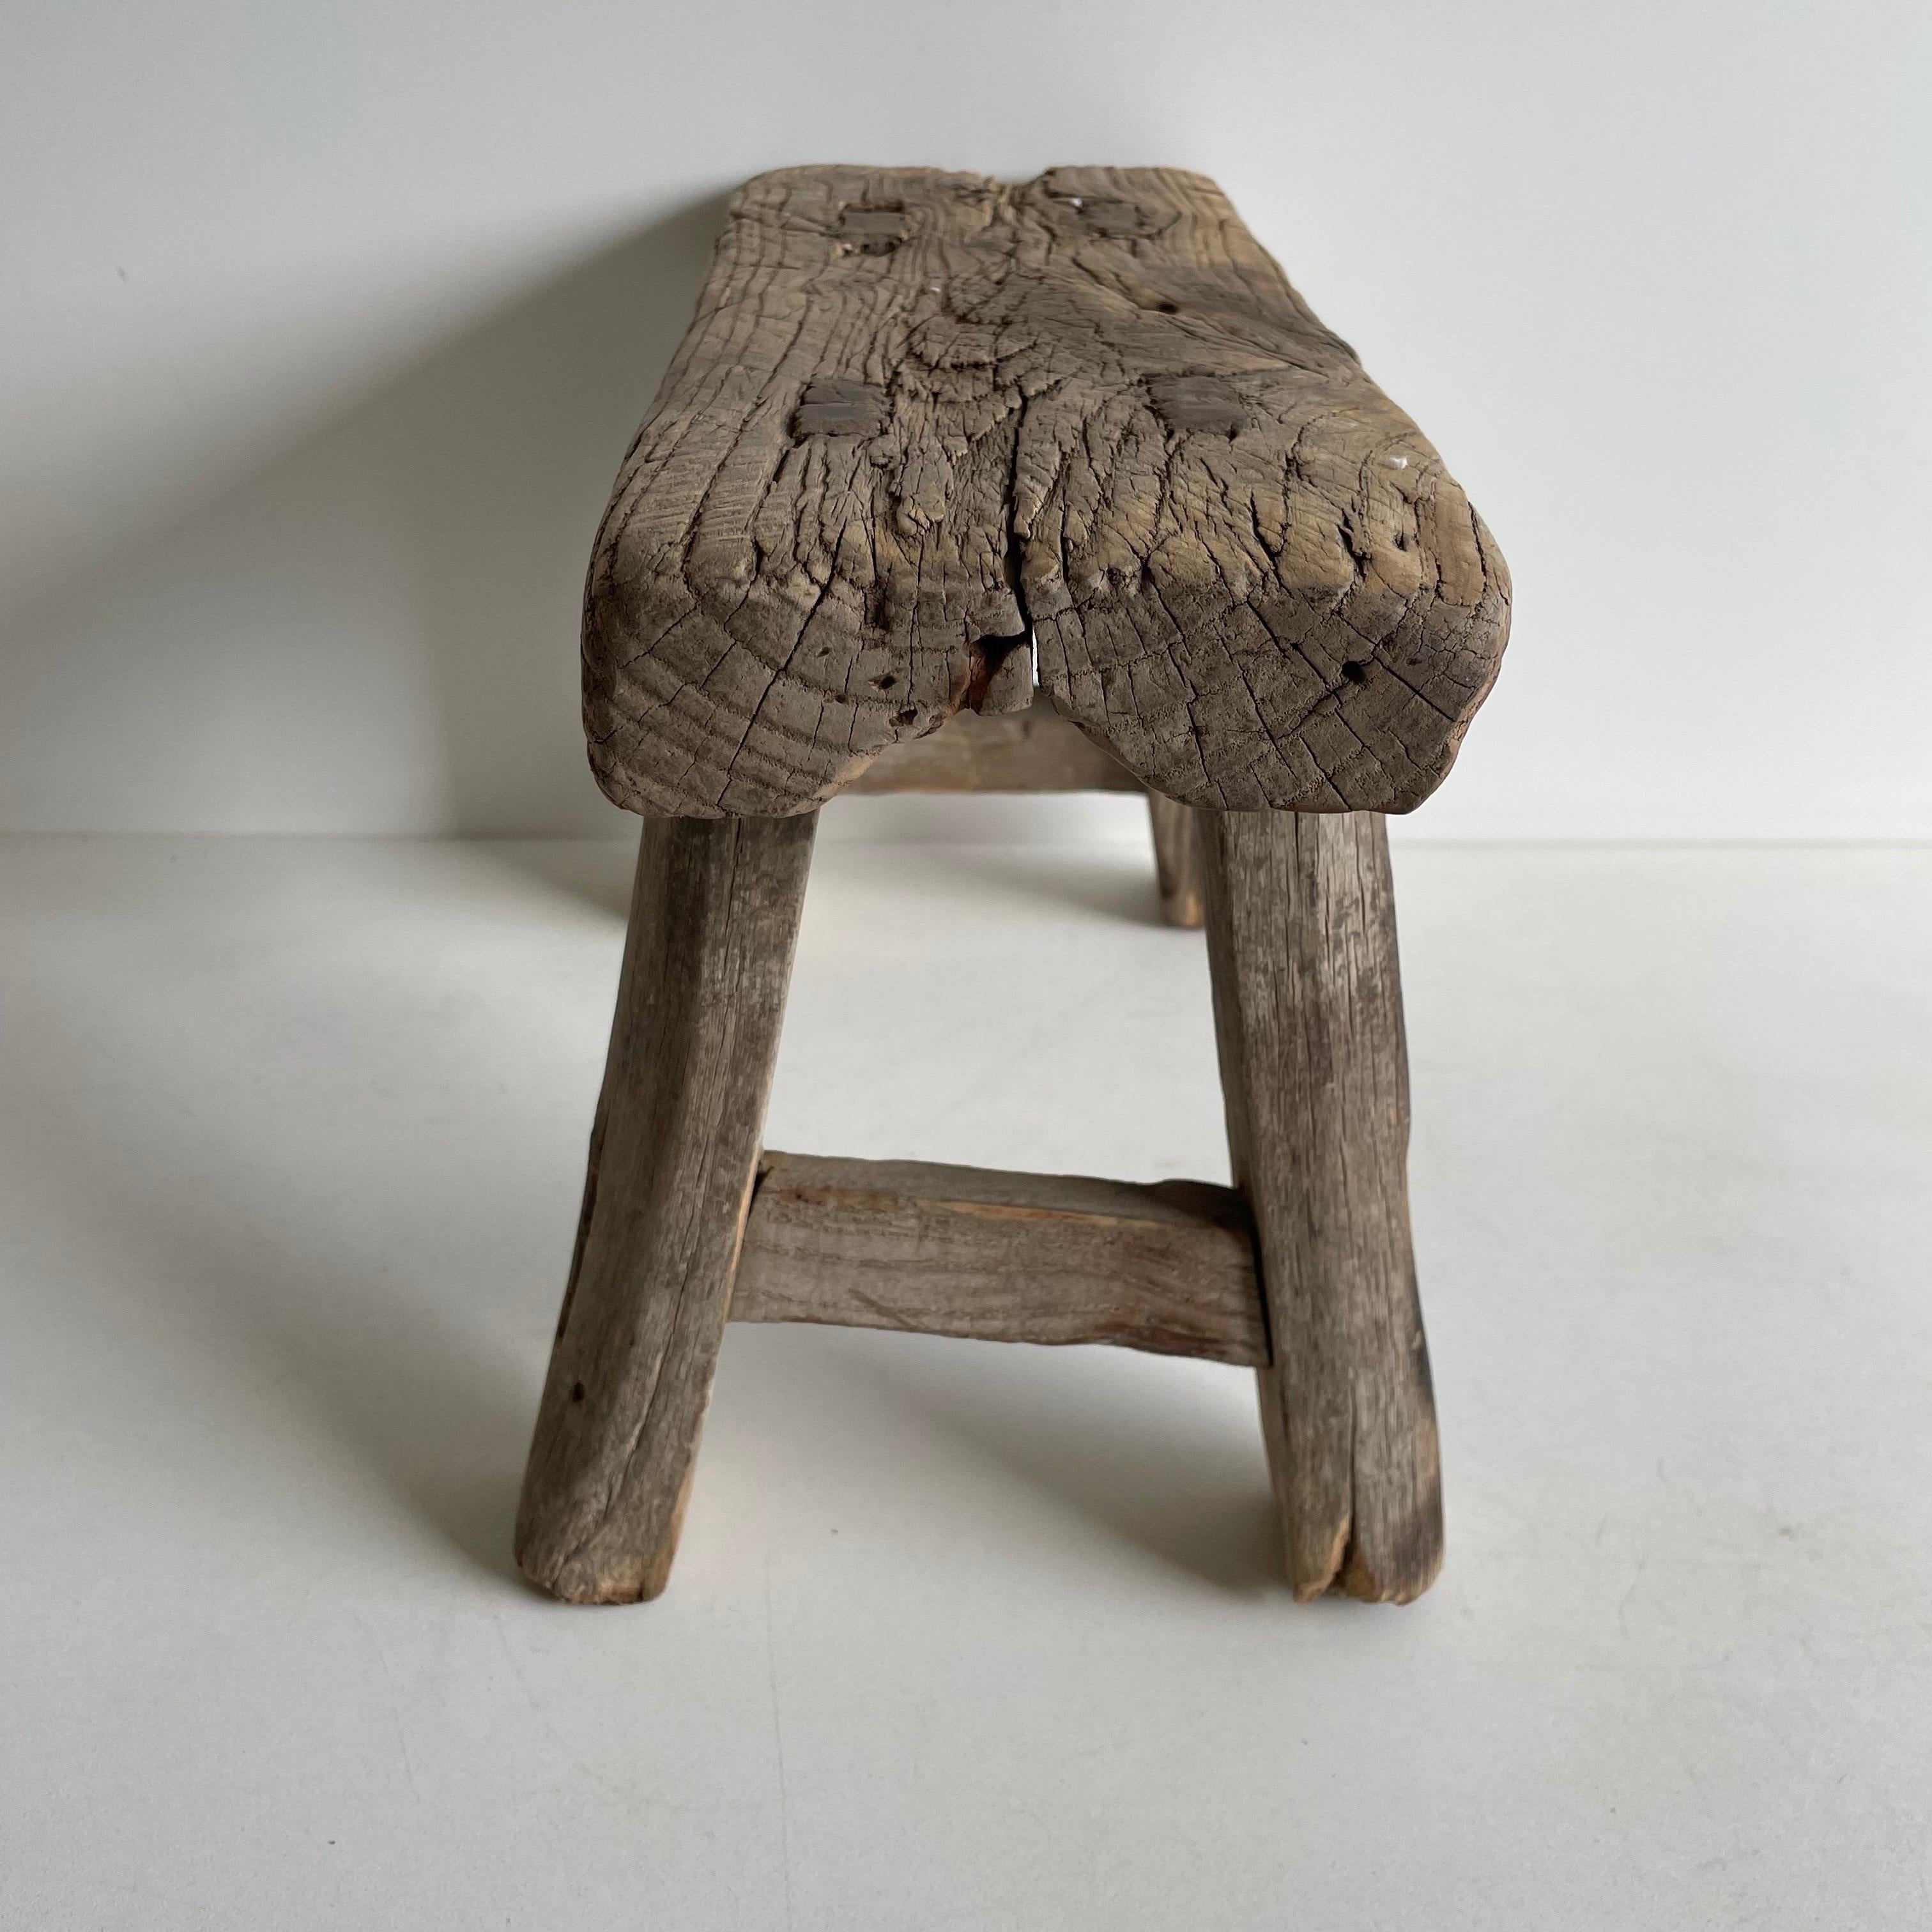 Vintage antique elm wood mini stool These are the real vintage antique elm wood mini stools! Beautiful antique patina, with weathering and age, these are solid and sturdy ready for daily use, use as a table, stool, drink table, they are great for